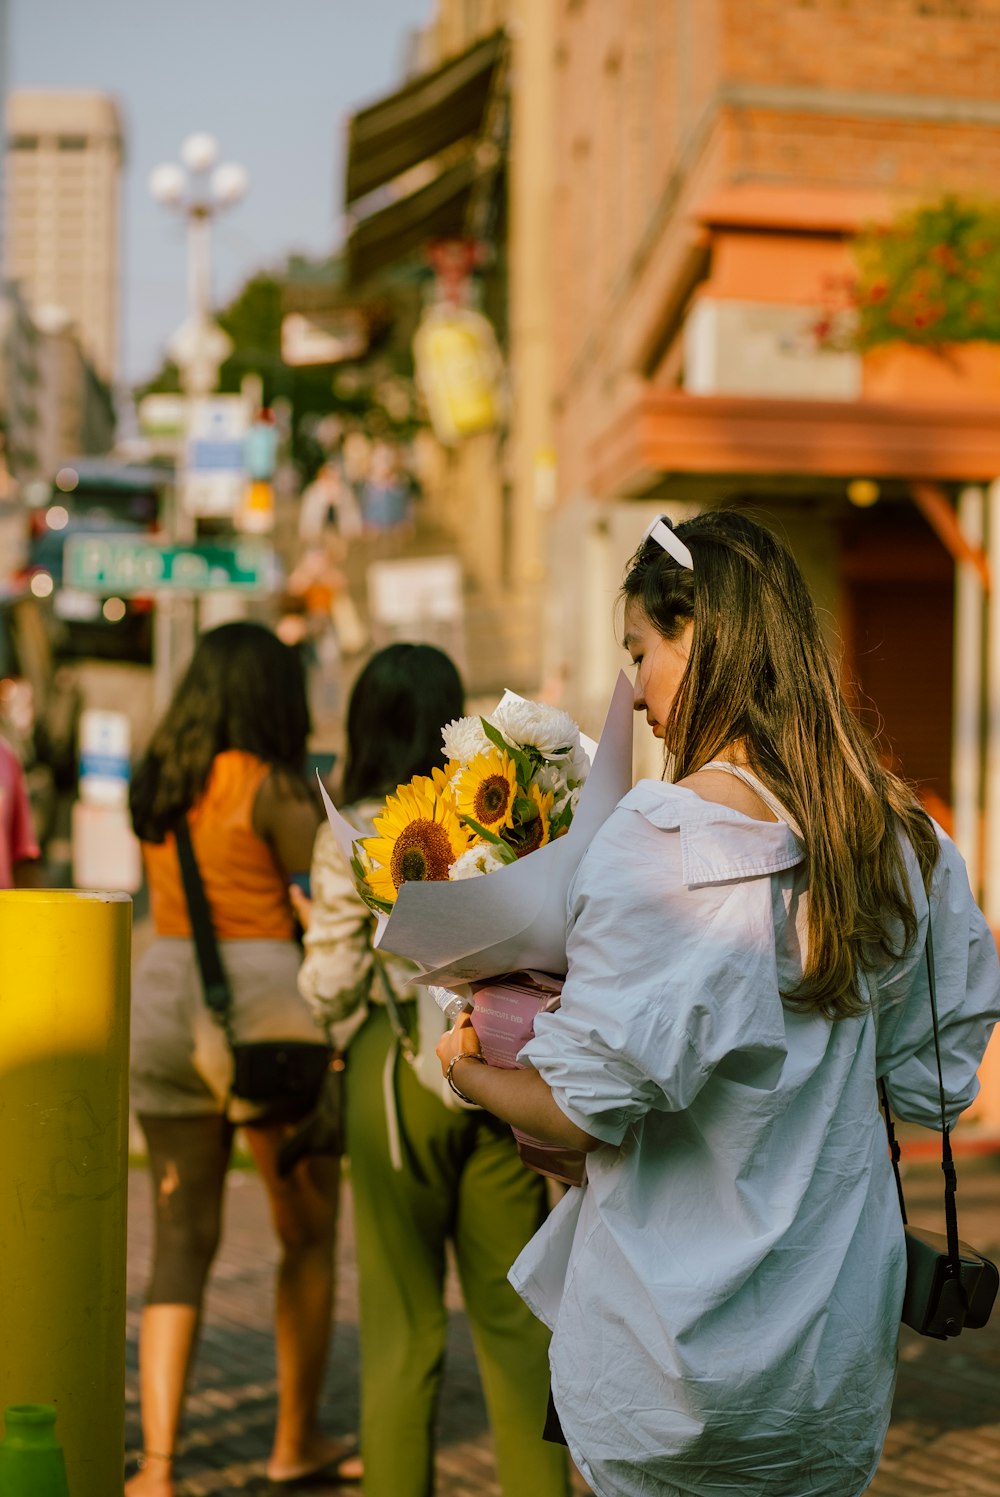 a woman holding a bouquet of sunflowers on a city street